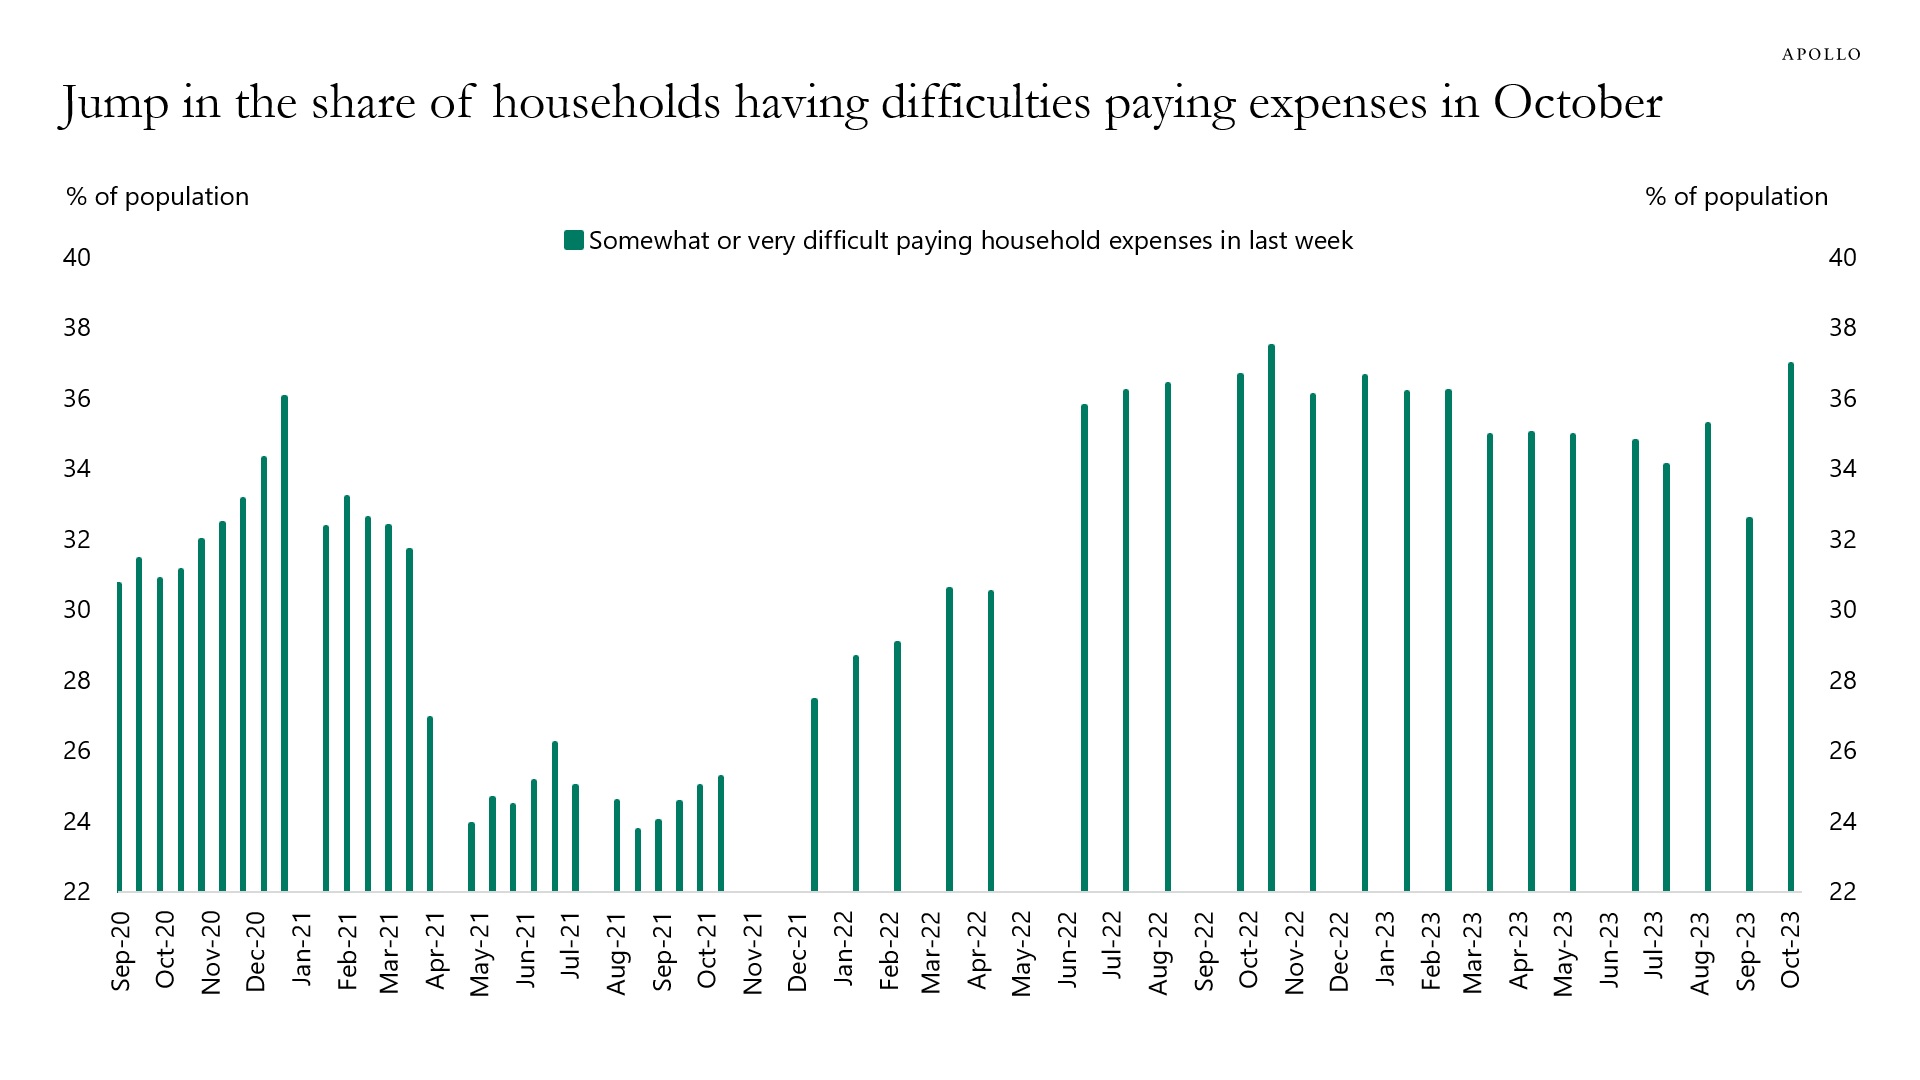 Households with difficulties paying expenses are surging. 